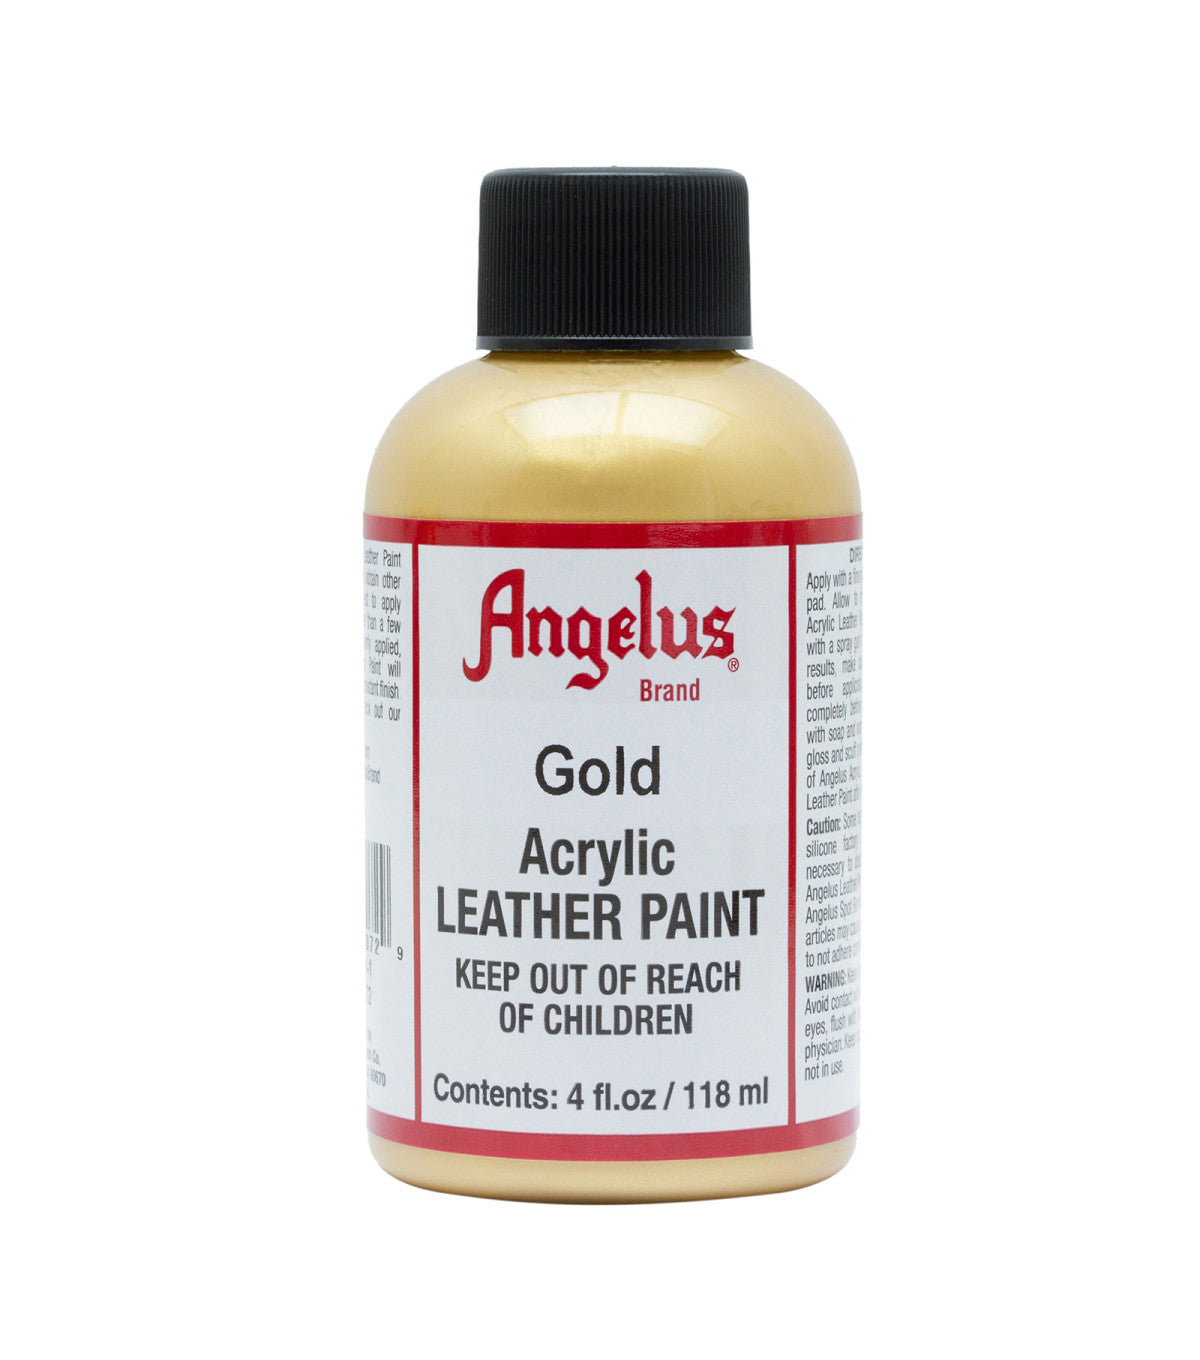 Angelus Leather Paint Pearlescent Rose Gold, 4 oz